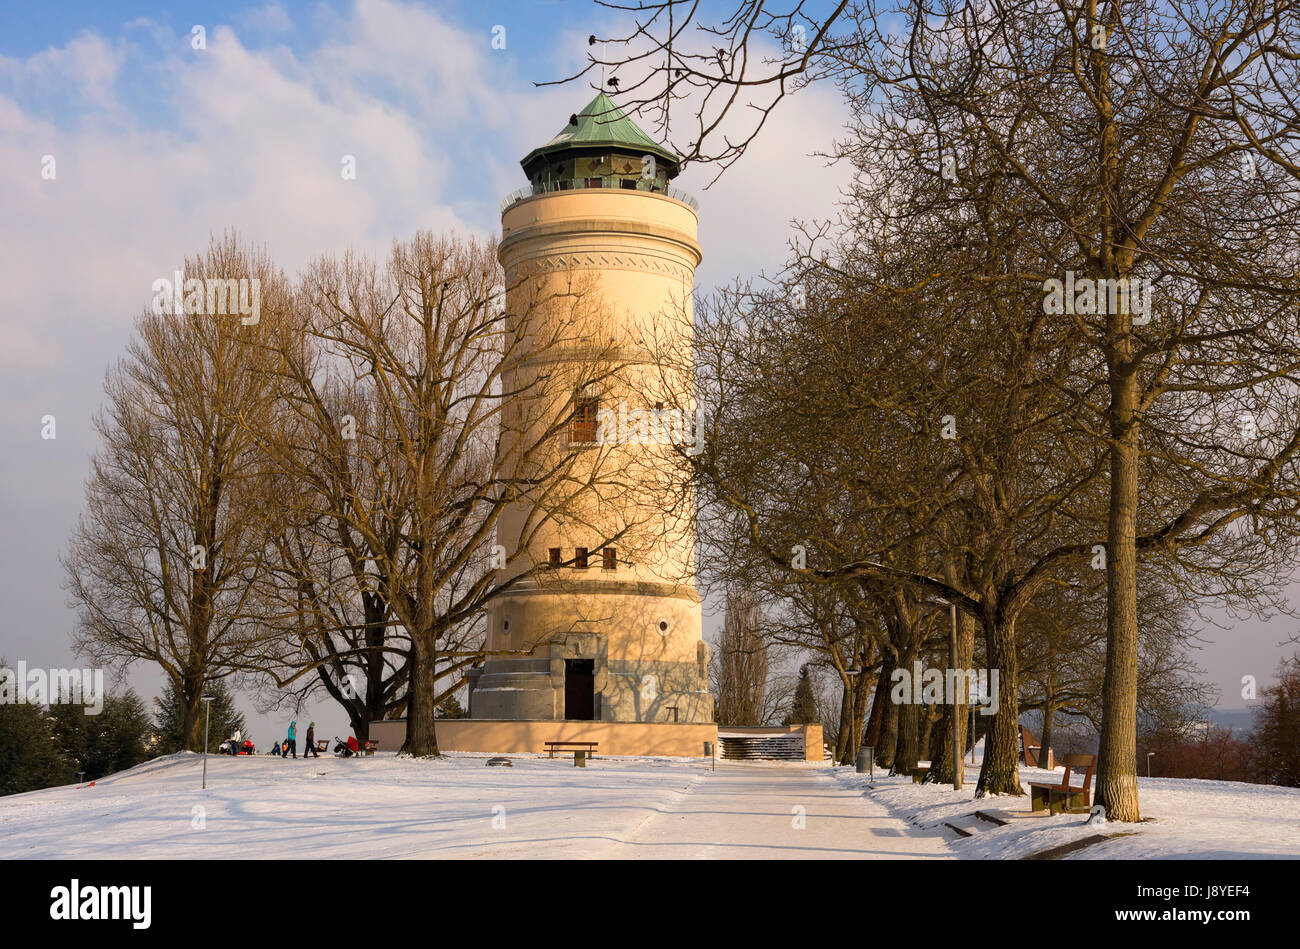 the historic water tower on the bruderholz in basel Stock Photo